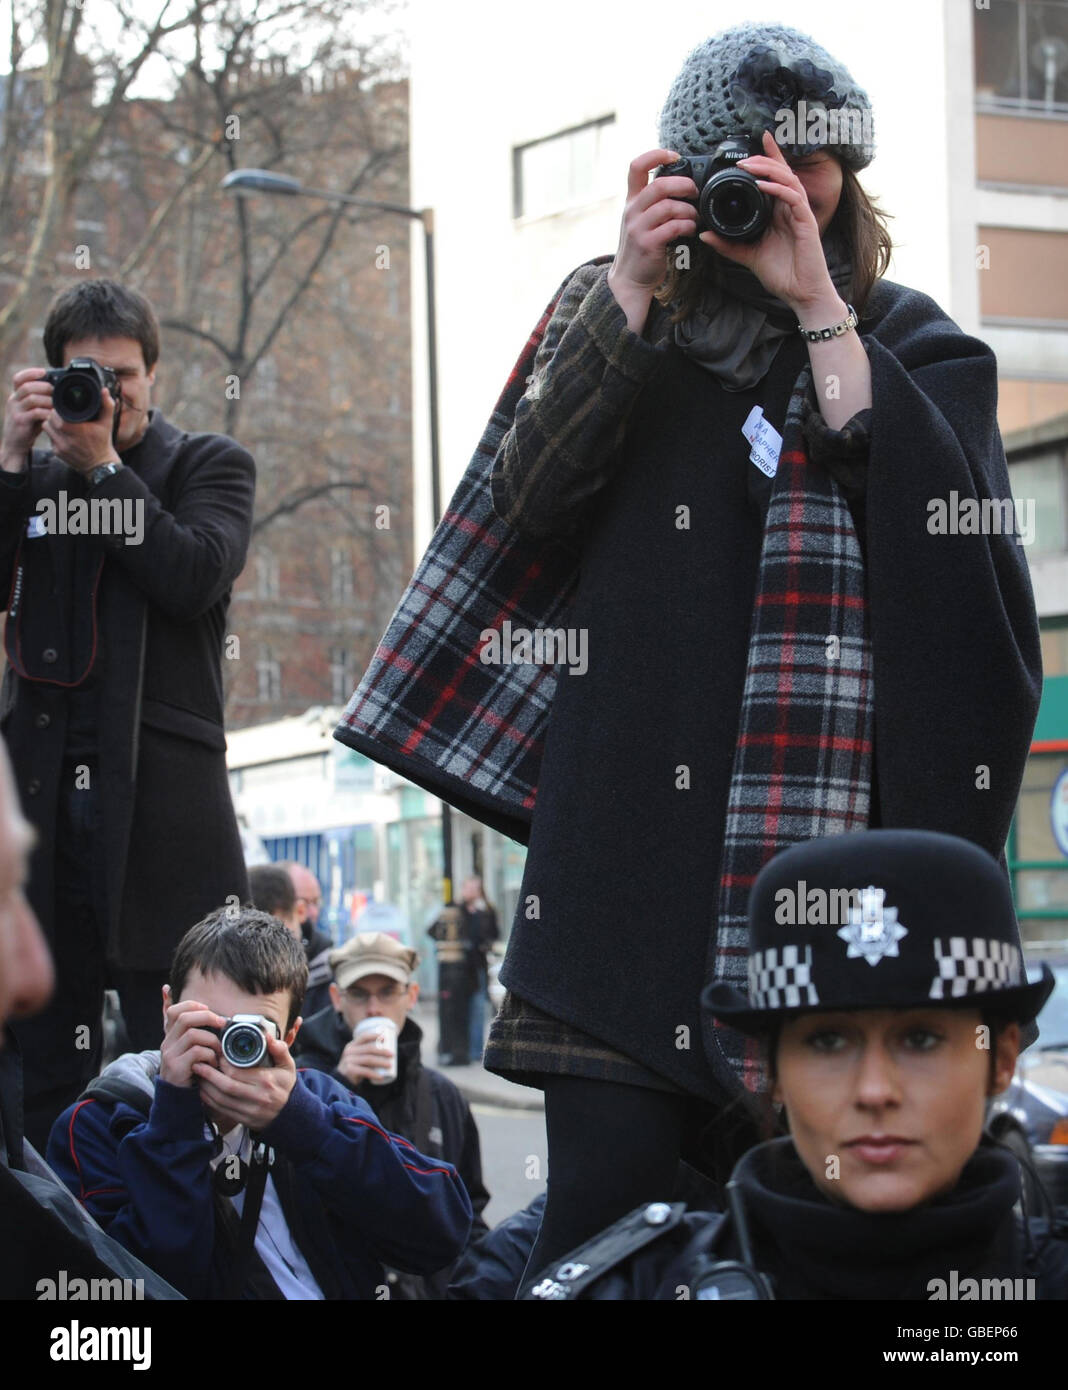 Photographers take pictures of police officers outside New Scotland Yard in London today as around 150 photographers held a mass photo shoot in protest at a new anti-terror law. Photojournalists say Section 76 of the Counter Terrorism Act, which became law today, could see them arrested for doing their job. Stock Photo